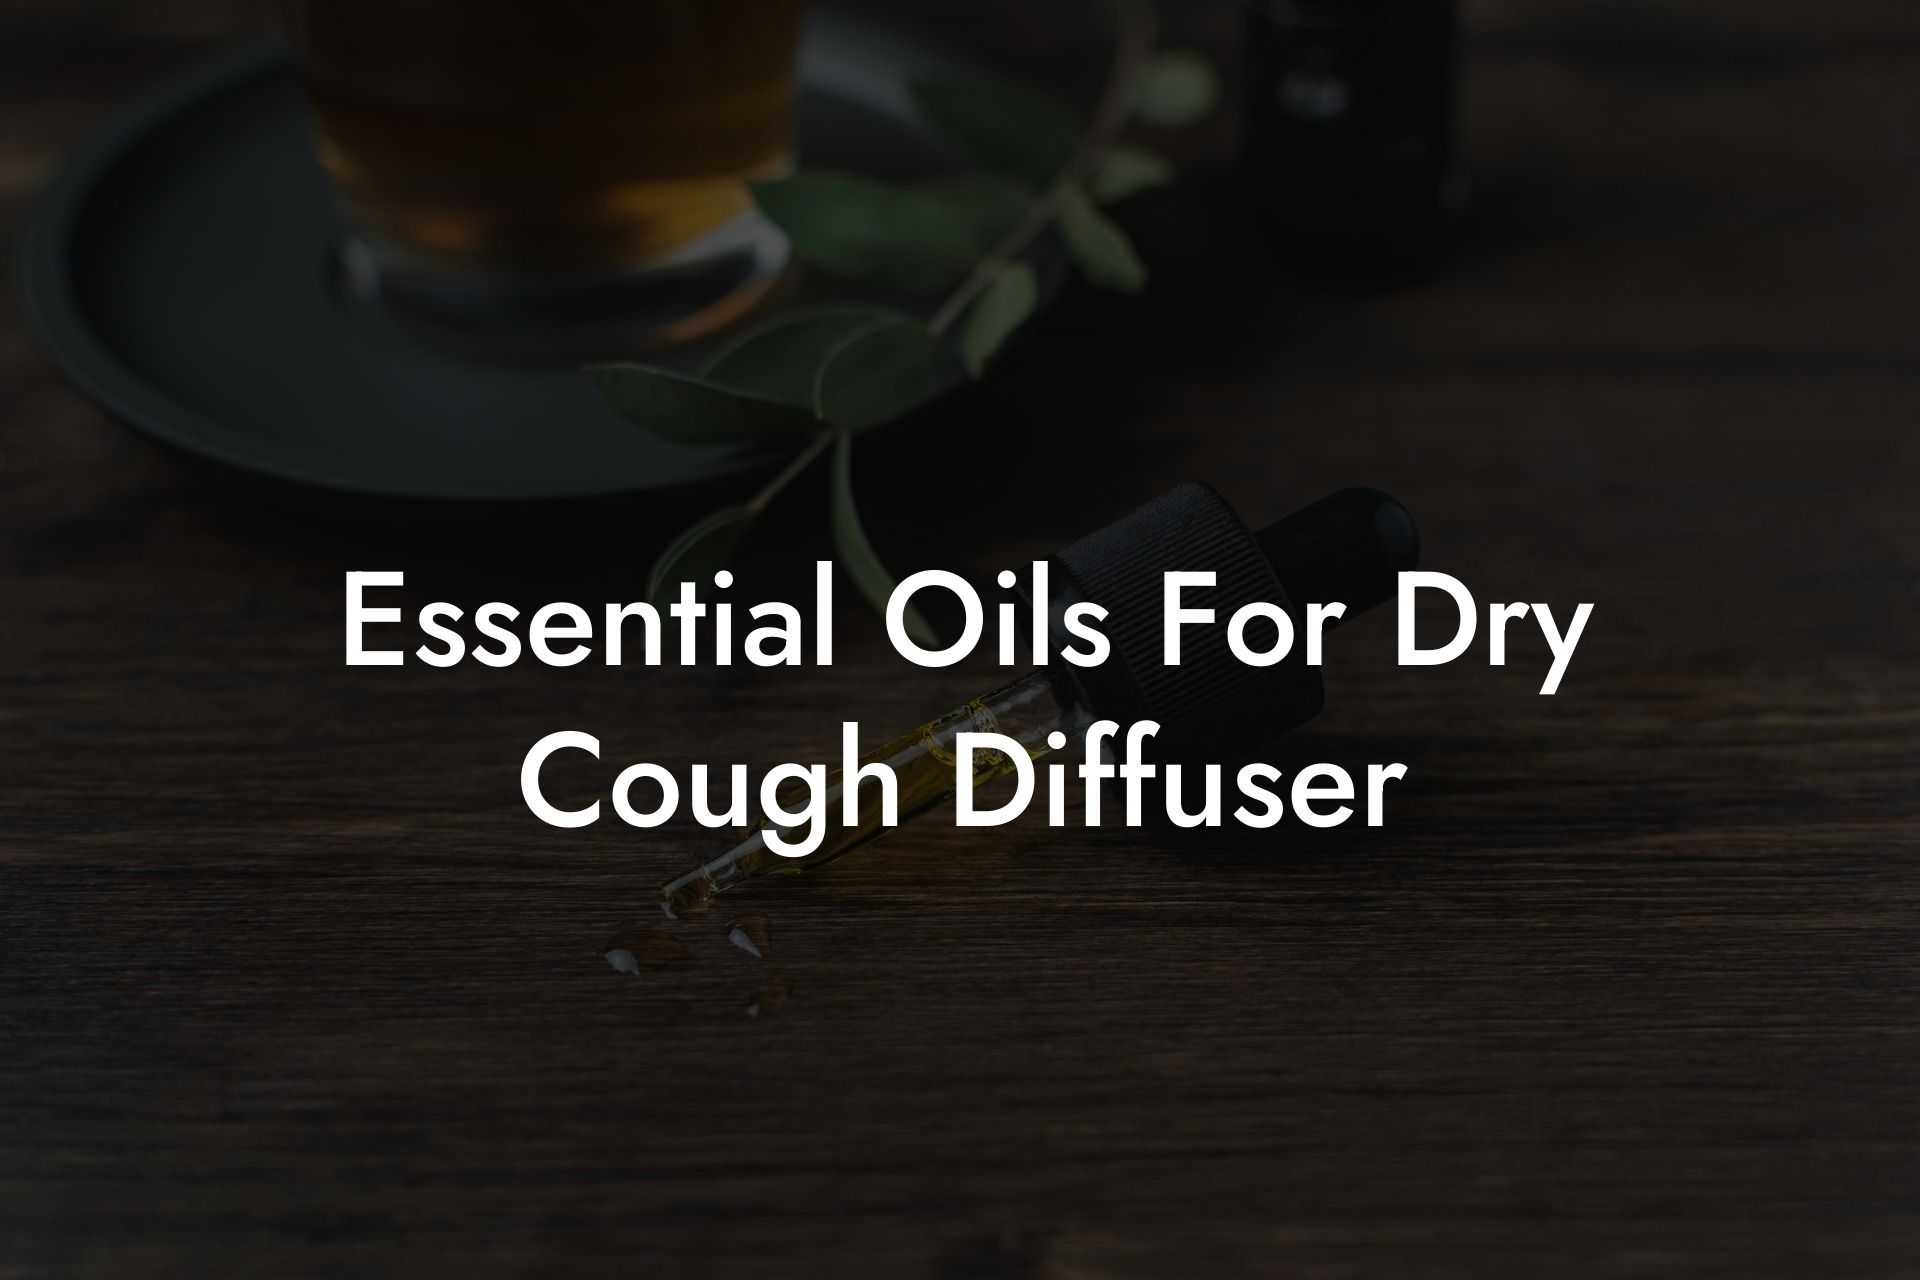 Essential Oils For Dry Cough Diffuser